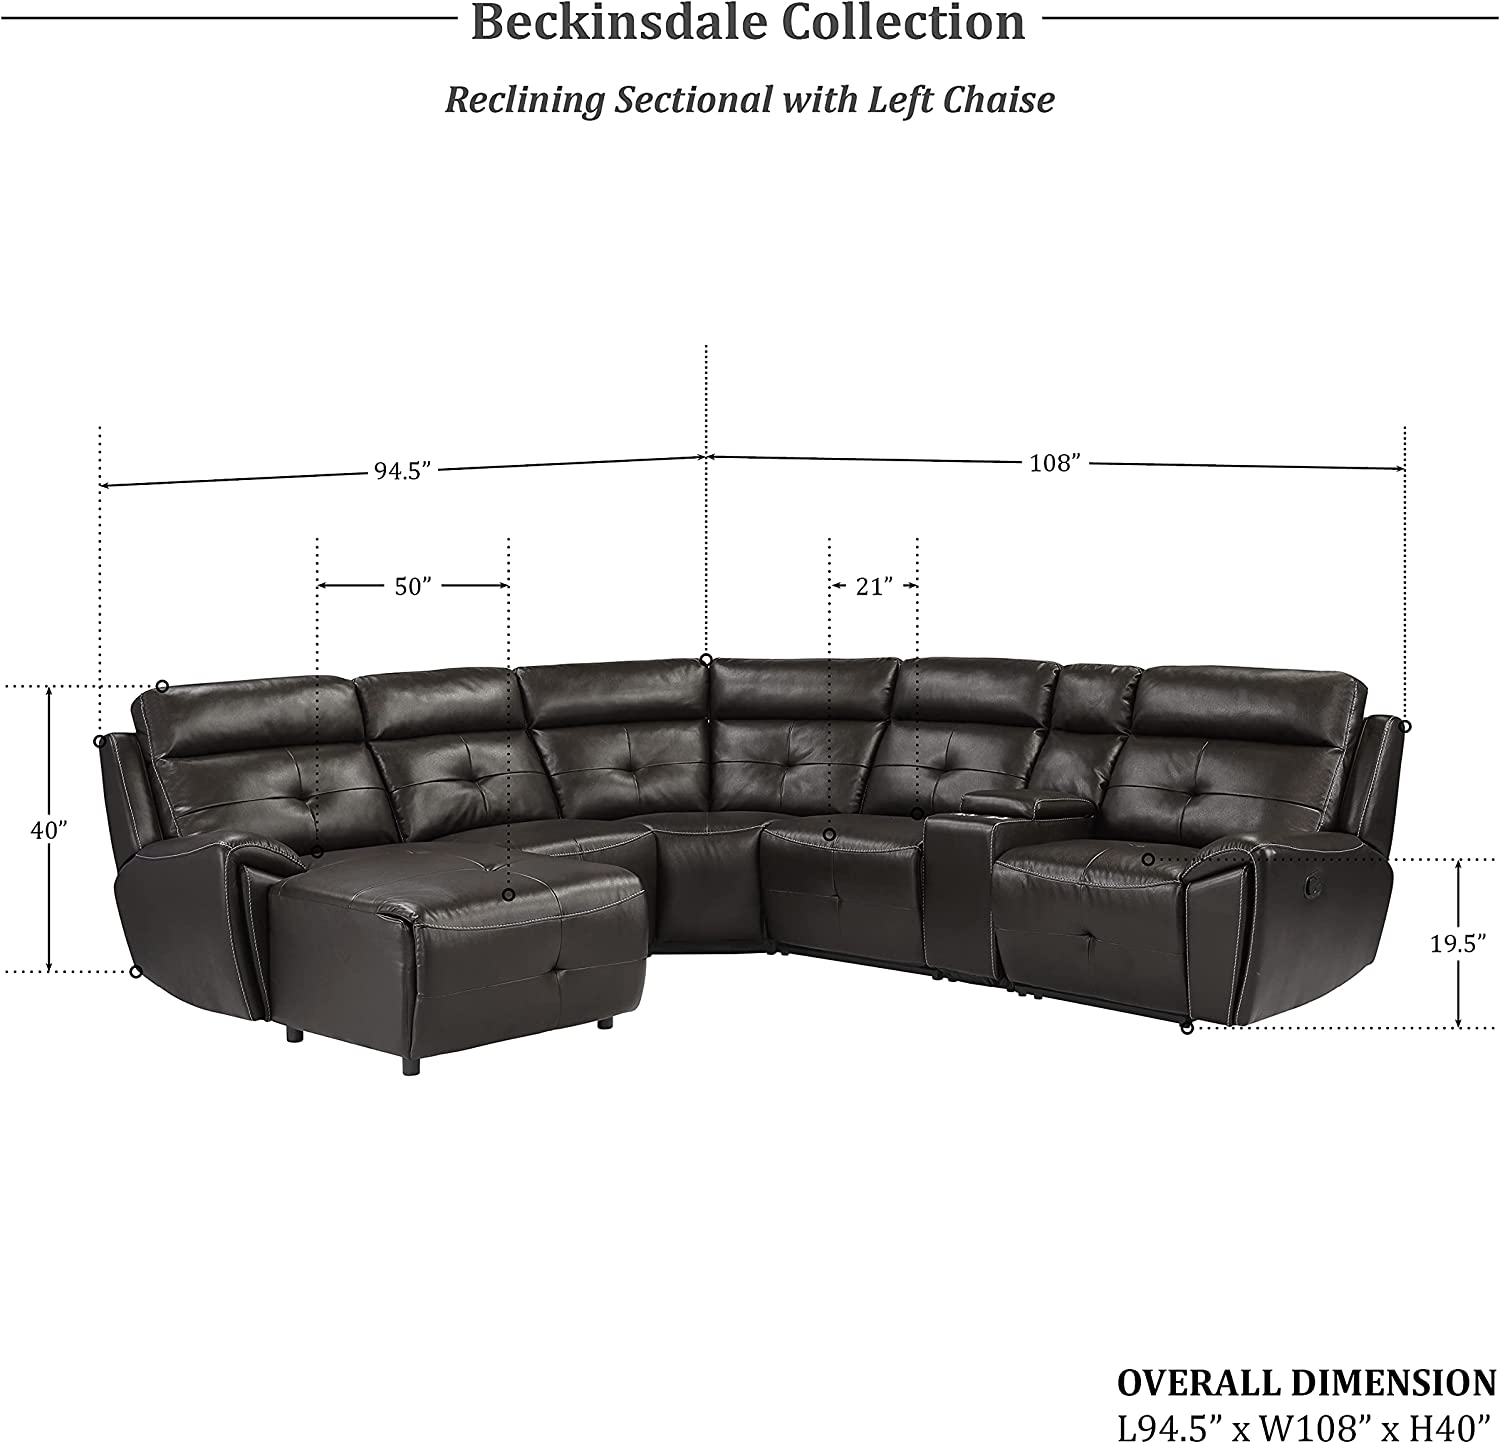 Lexicon Beckinsdale Modular Reclining Sectional Sofa Dimensions